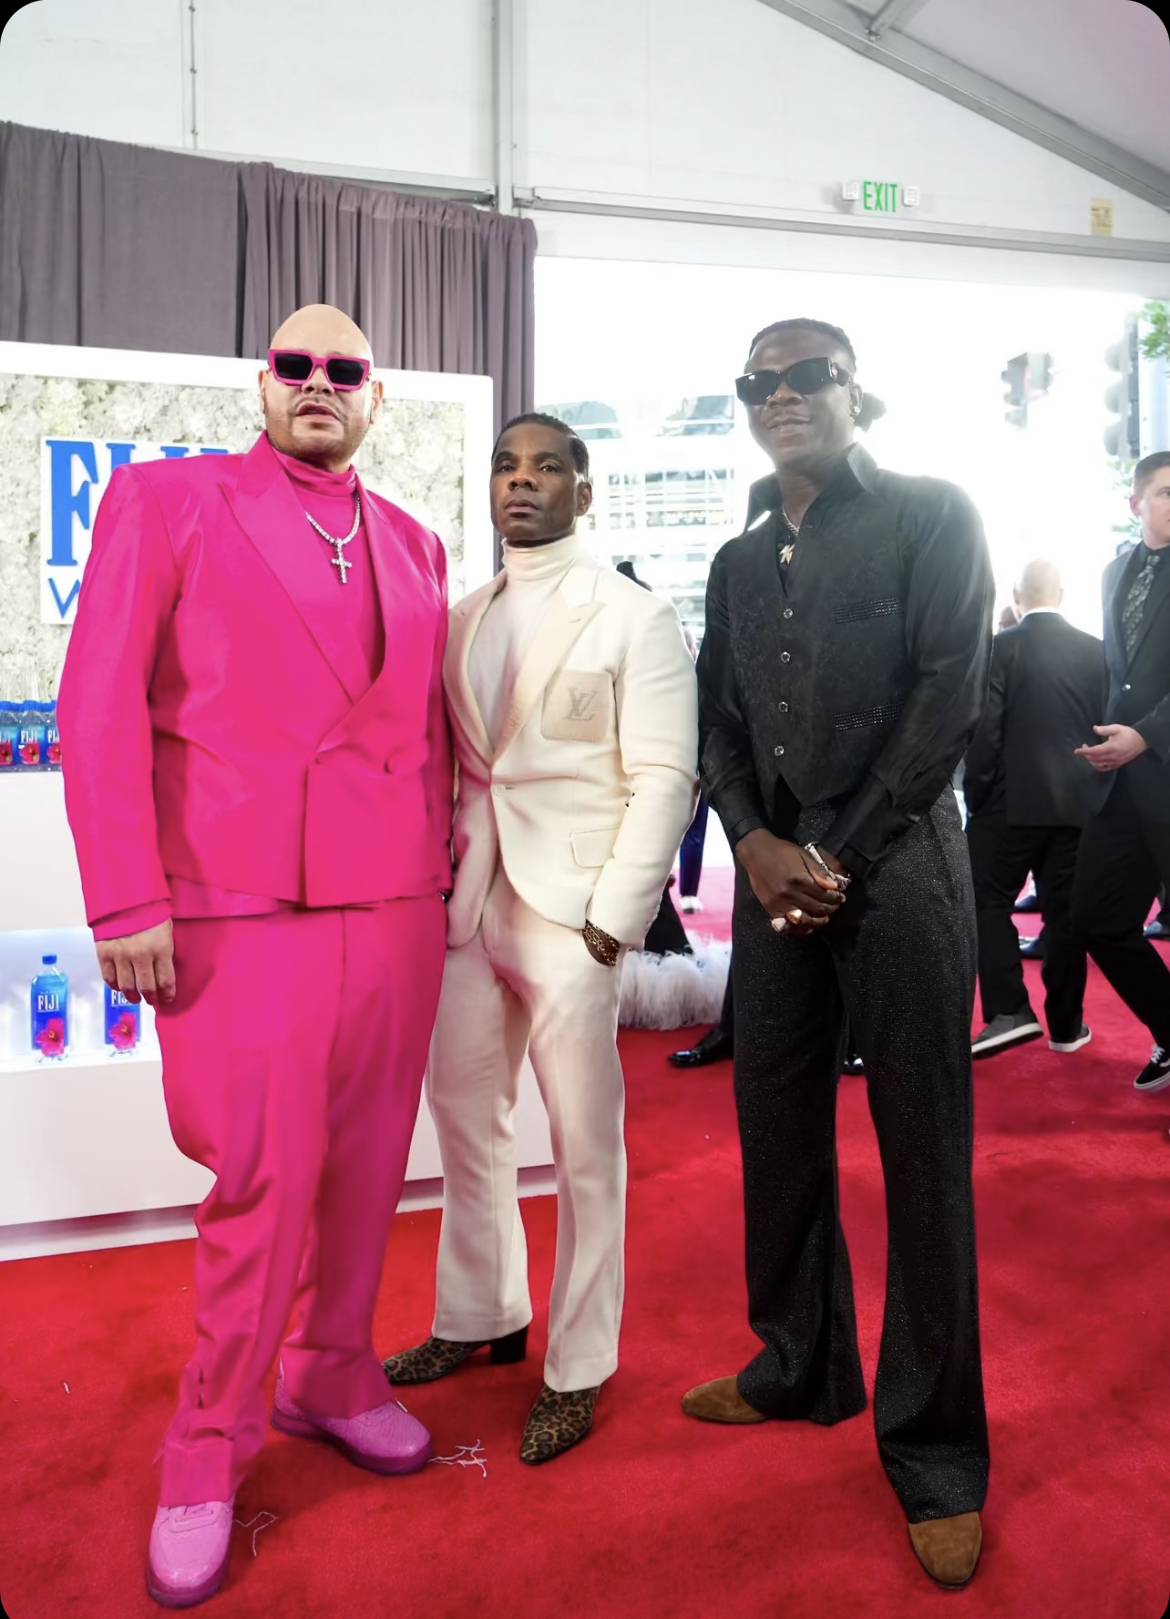 Stonebwoy with Kirk Franklin and Fat Joe at Grammys